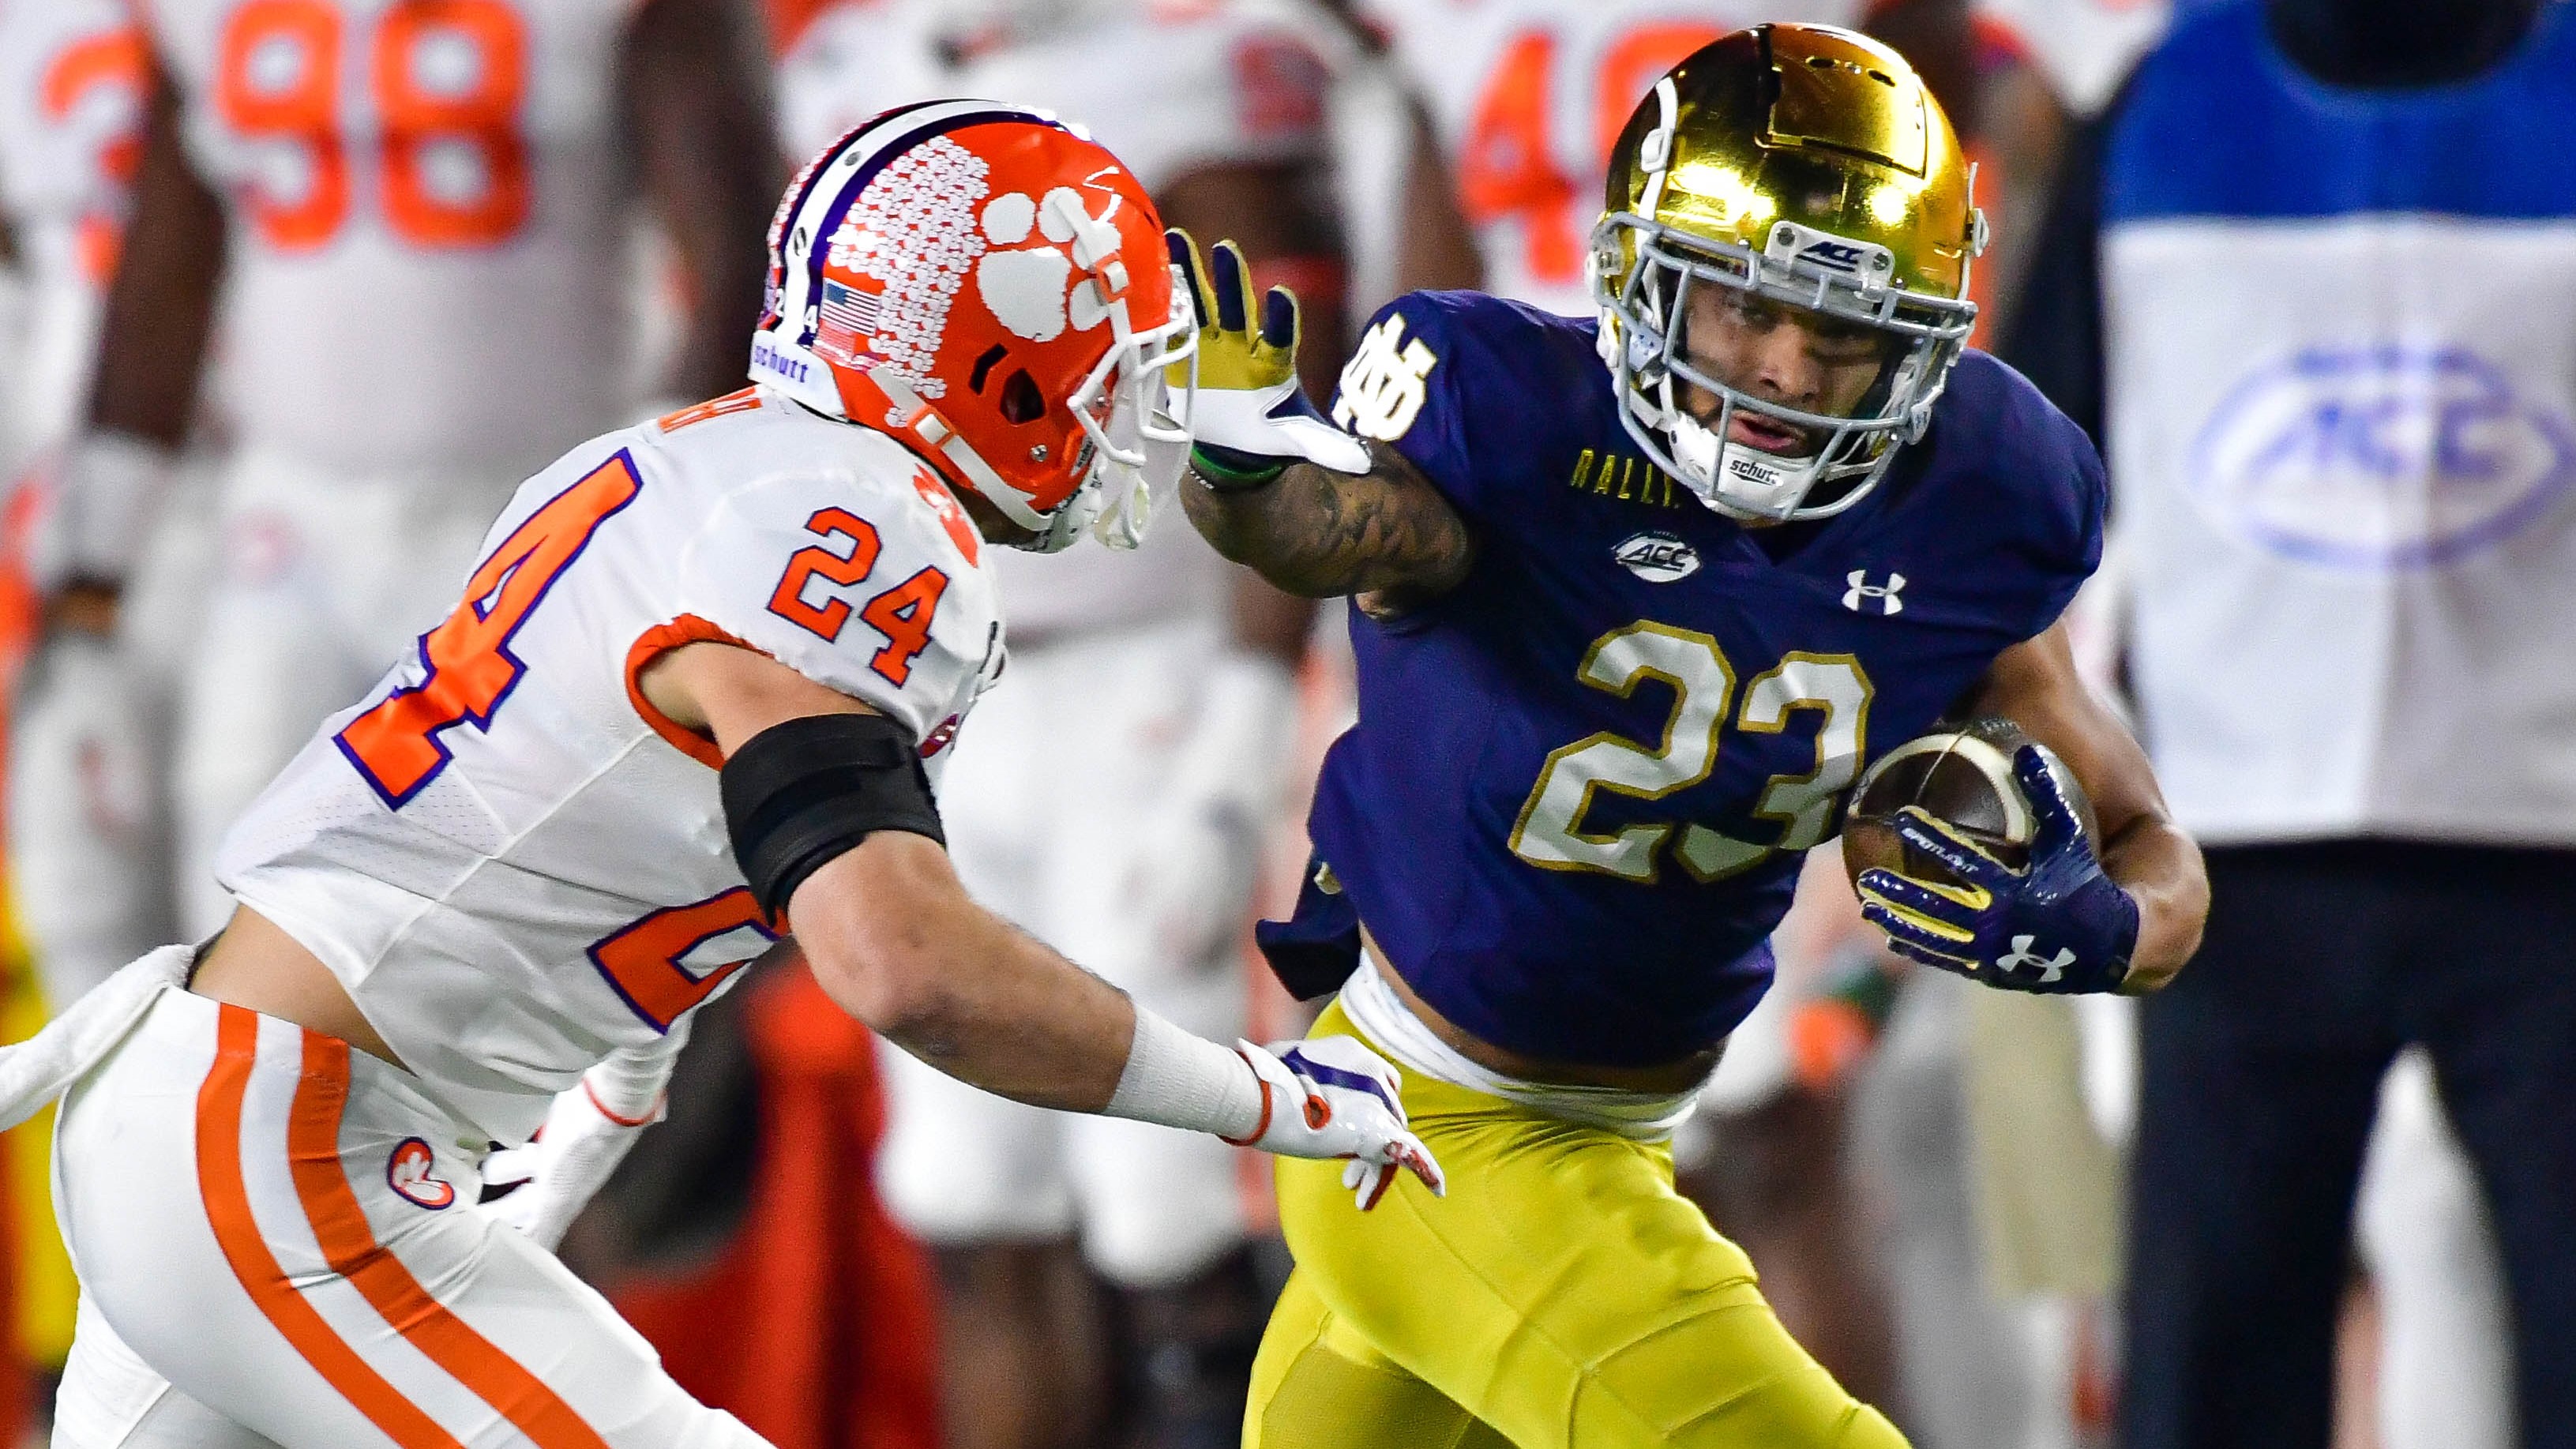 Notre Dame vs Clemson live stream how to watch ACC Championship game